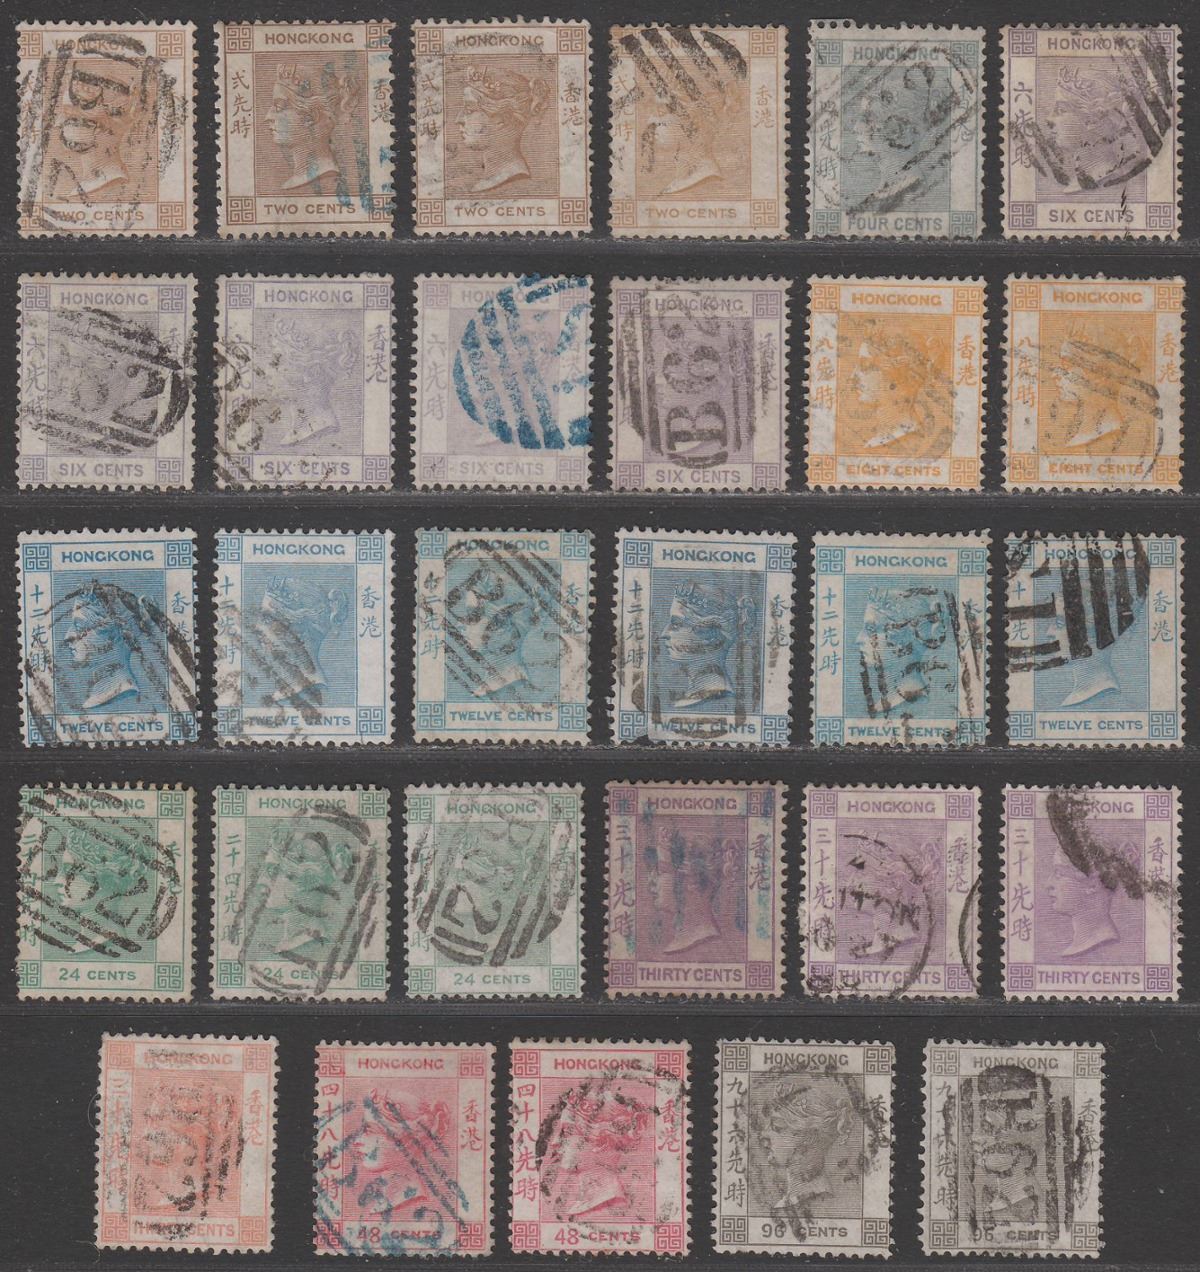 Hong Kong 1863-71 Queen Victoria Selection to 96c Used Good Range of Shades